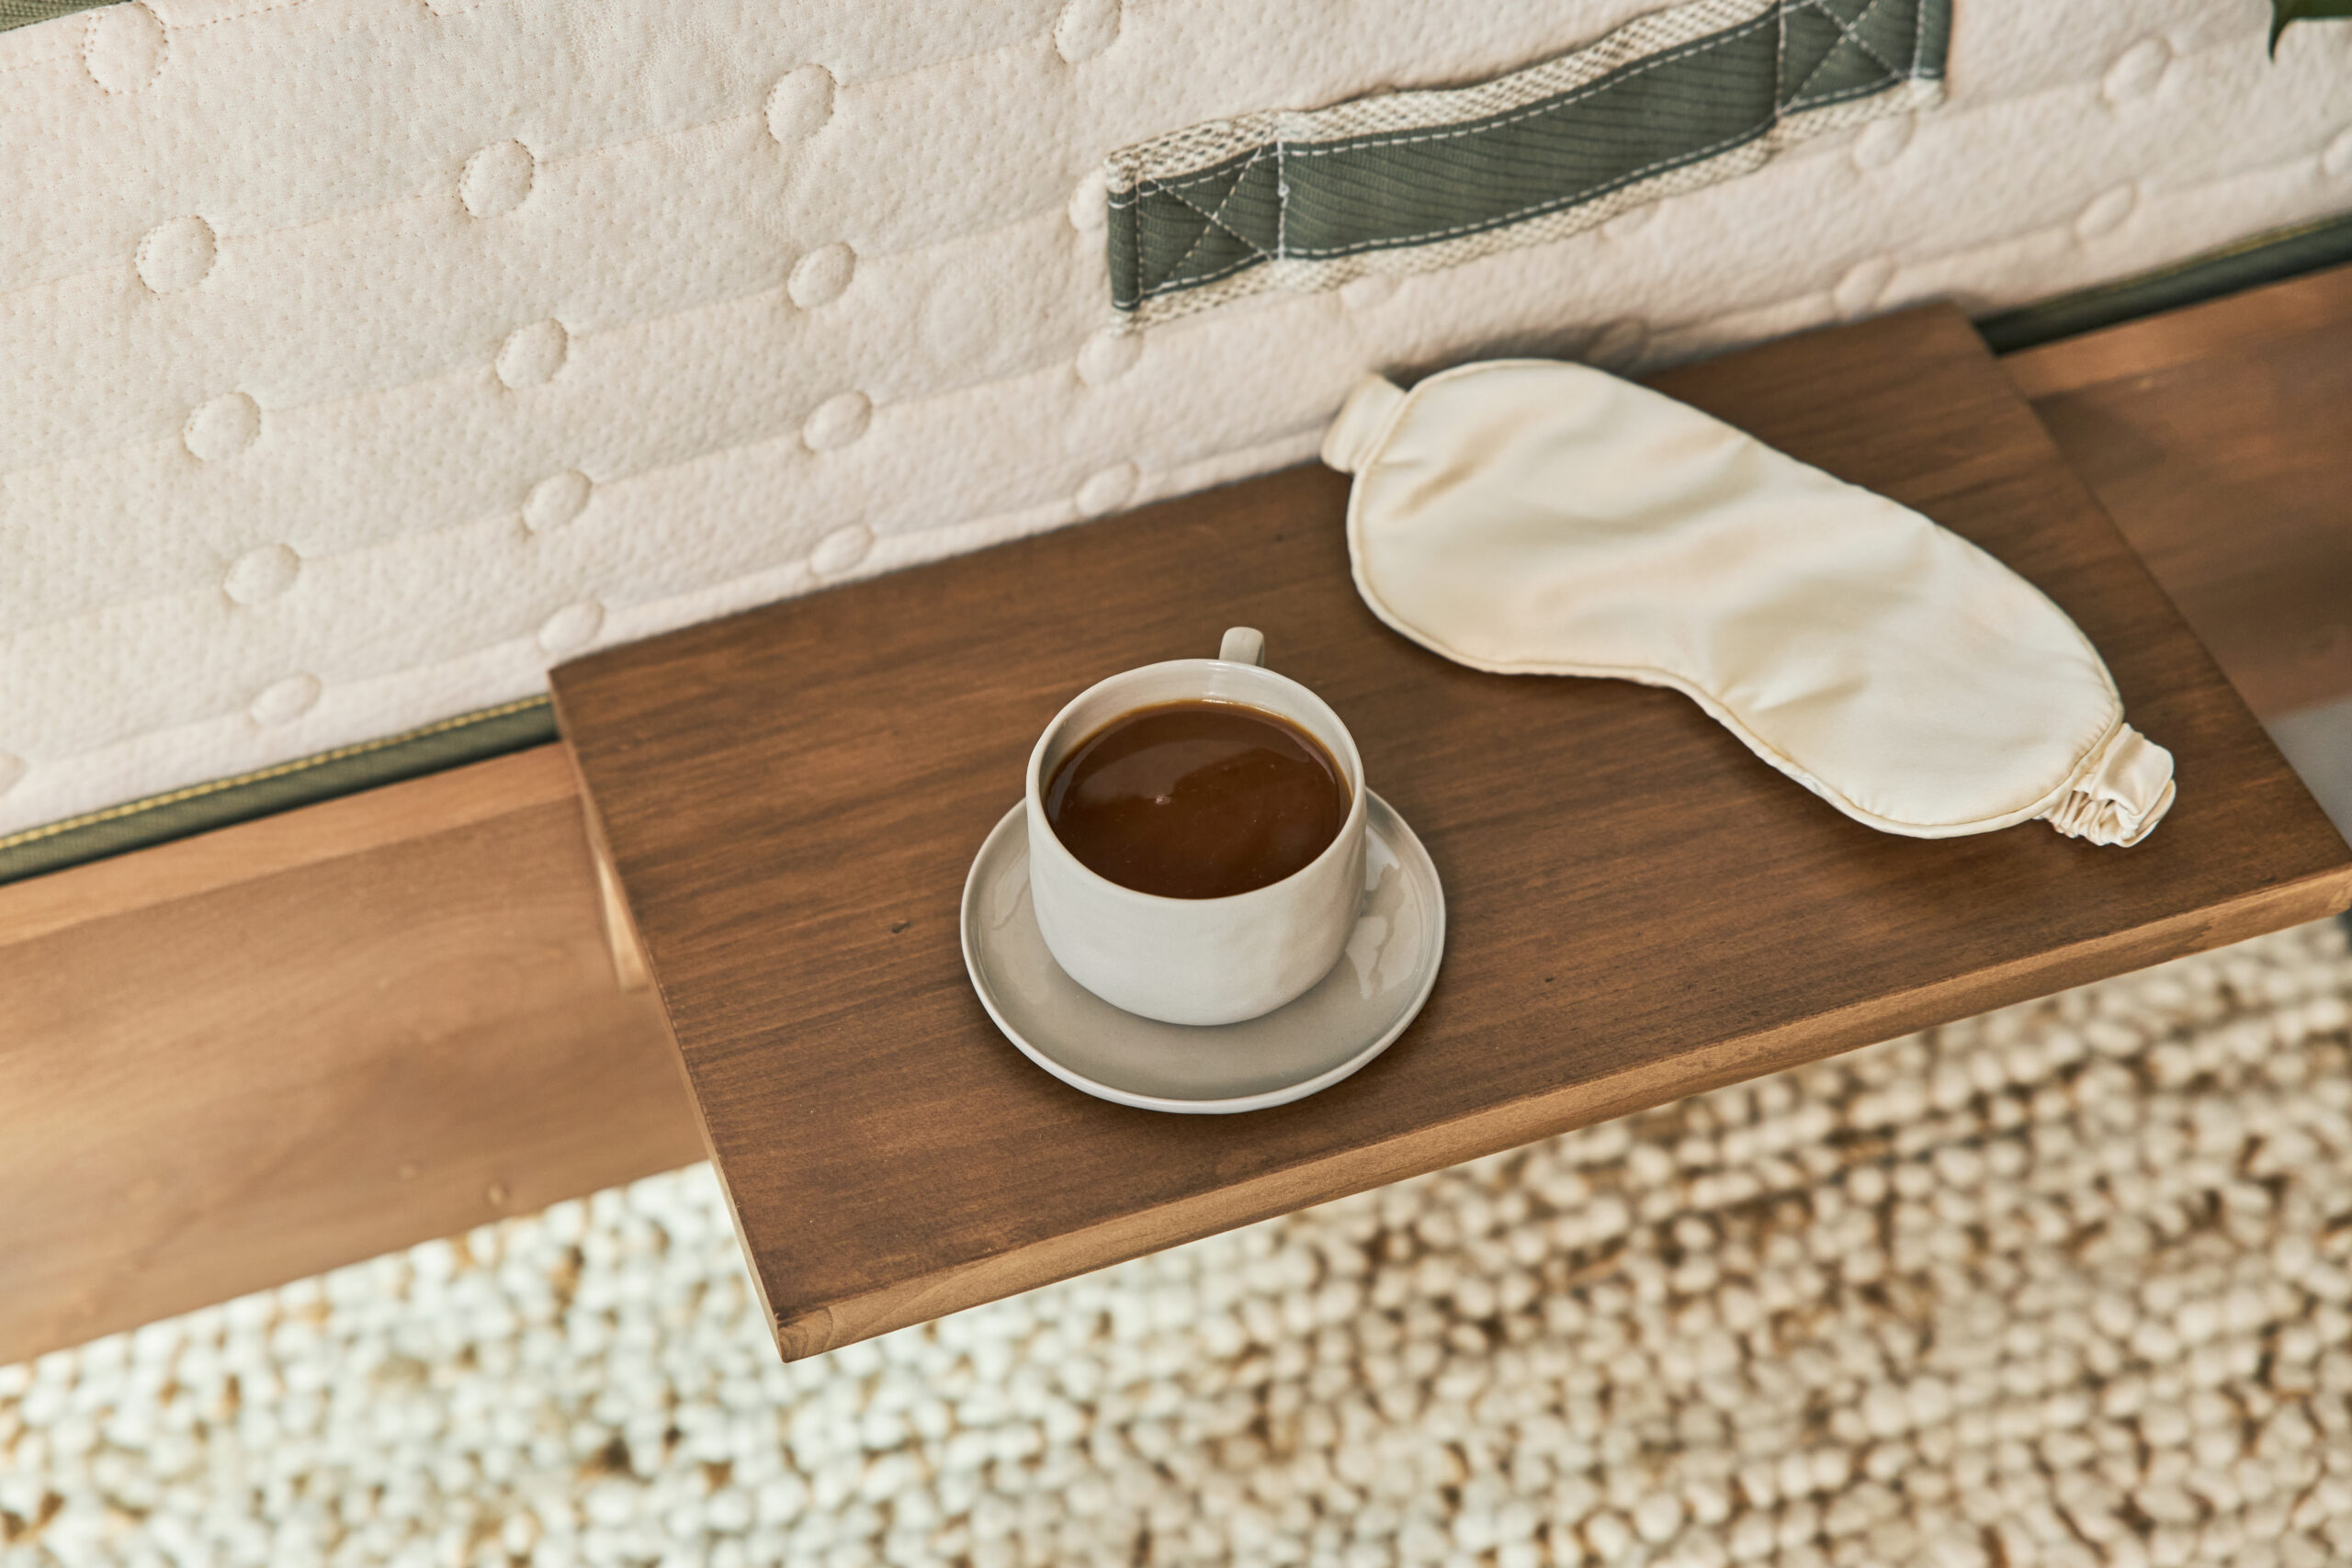 cup of coffee and sleep mask on side table